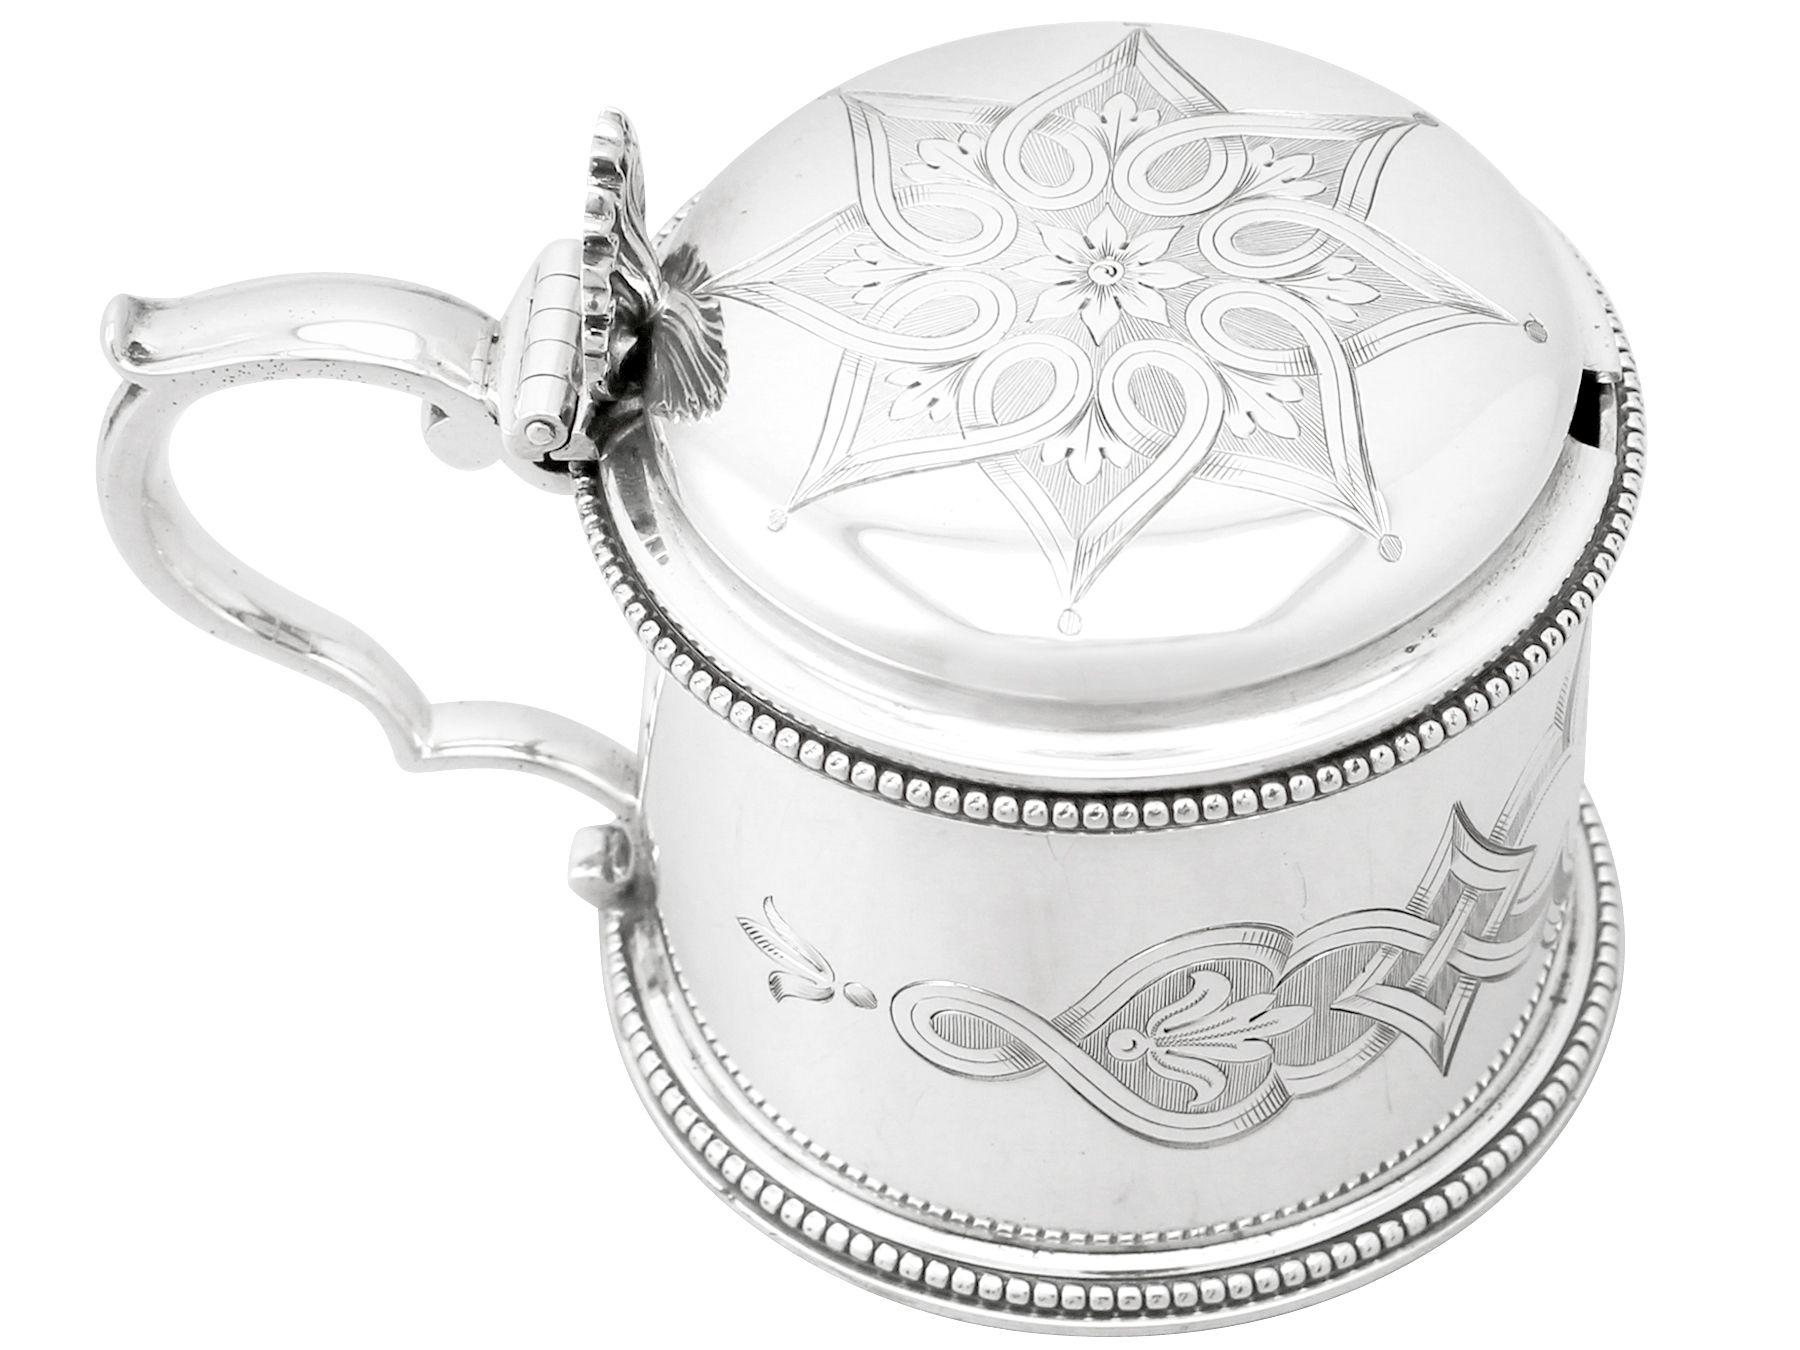 An exceptional, fine and impressive antique Victorian English sterling silver mustard pot made by Edward & John Barnard; an addition to our Victorian silver condiments collection.

This exceptional antique Victorian sterling silver mustard pot has